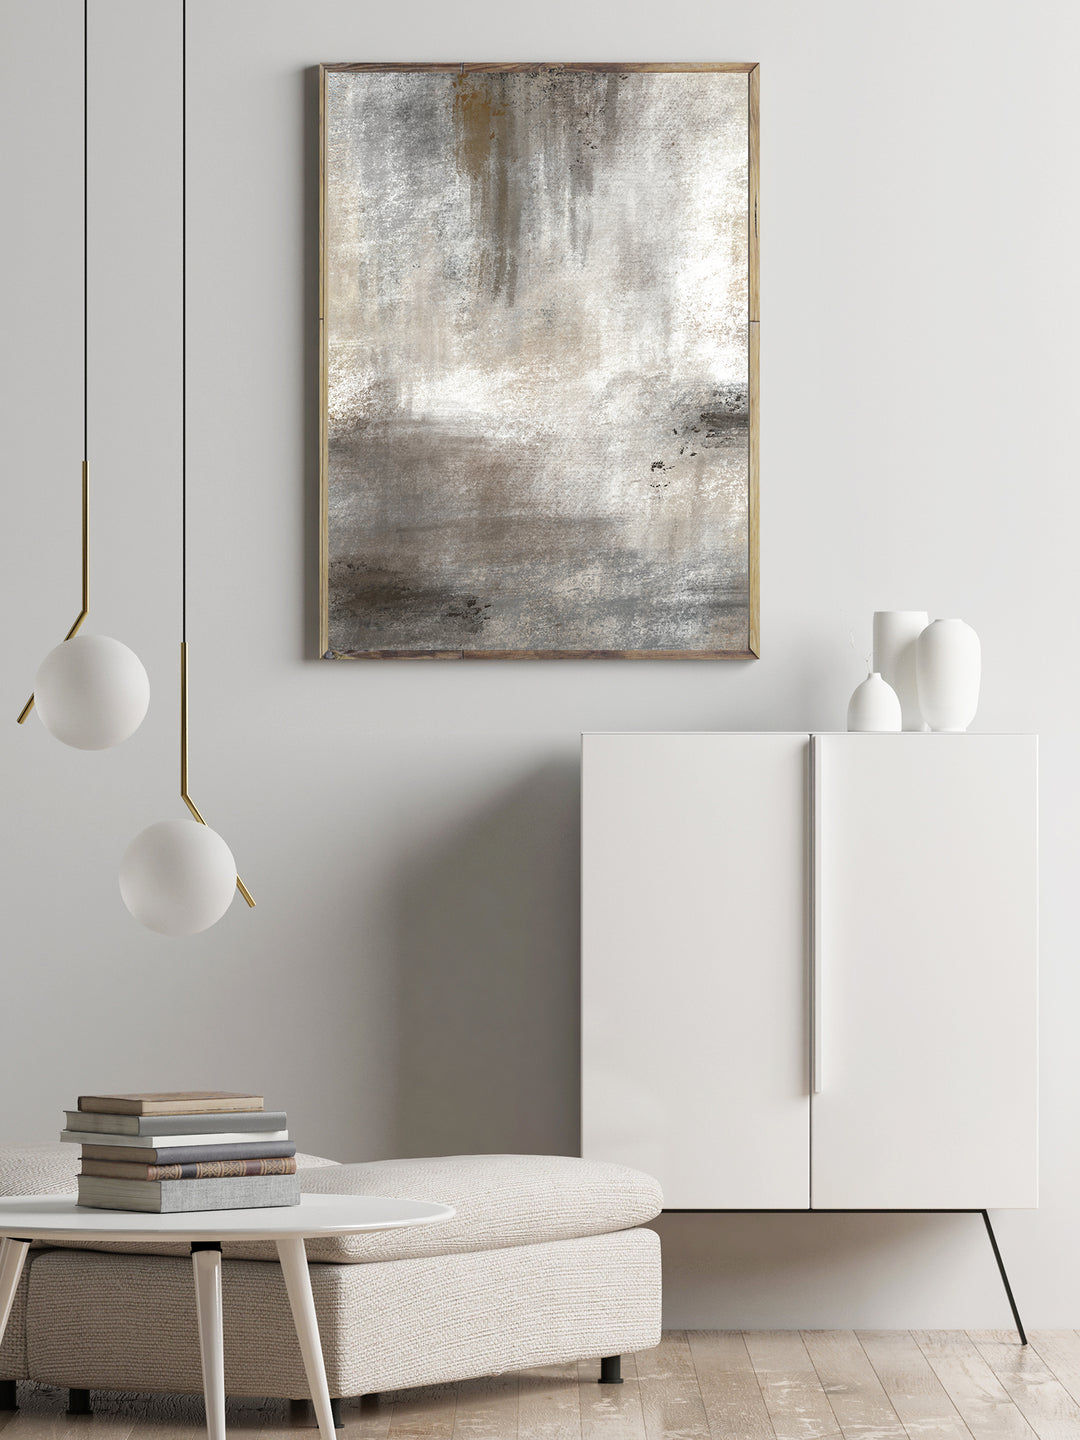 Burnt neutrals abstract downloadable print set of 3